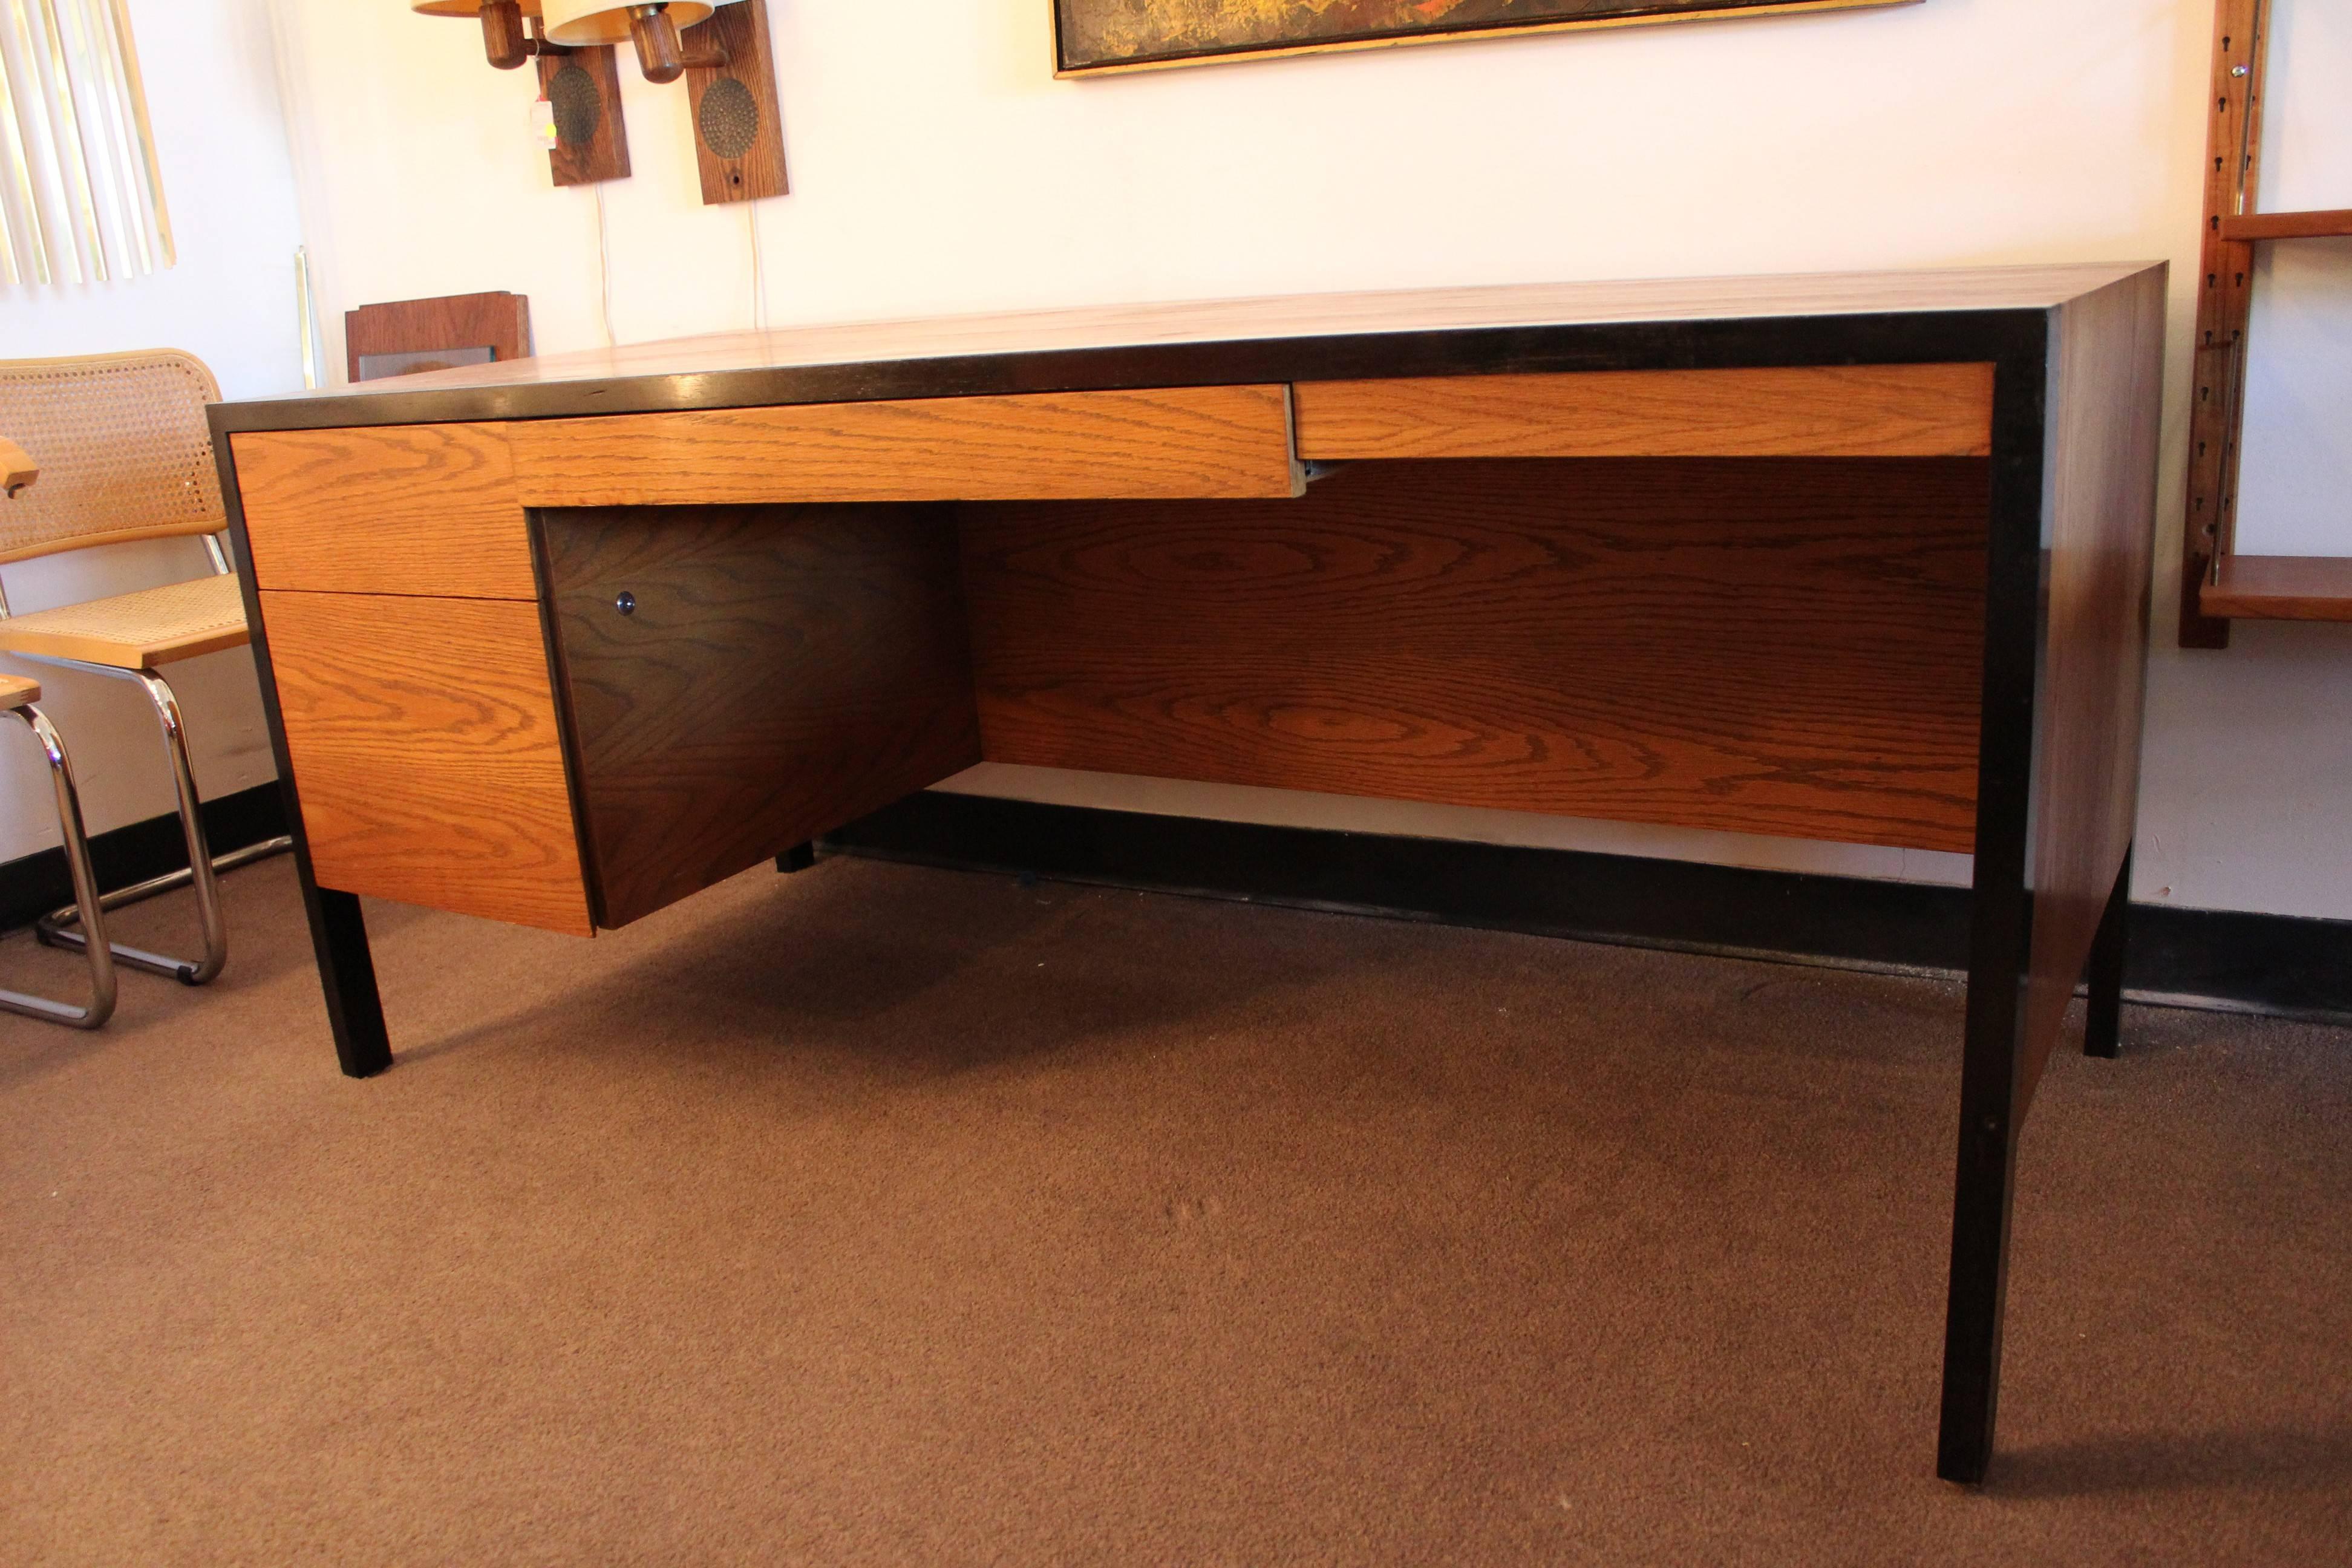 A stunning executive desk by Harvey Probber, circa 1960s. In very good vintage condition. Retains original tags. The dimensions are 66